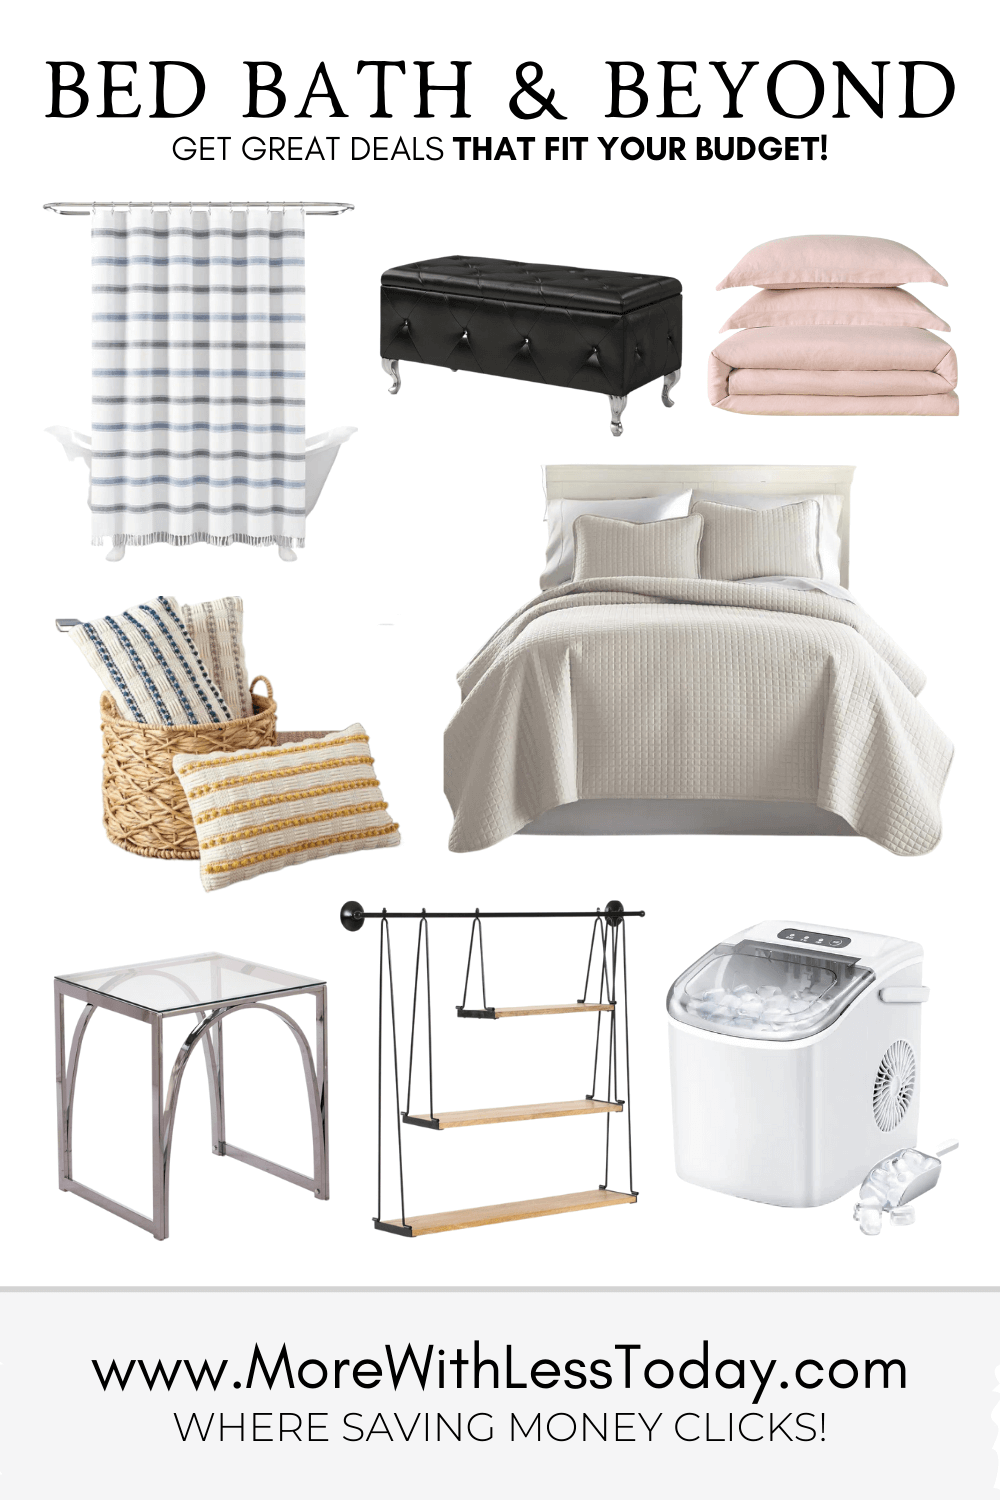 Good Deals from Overstock Bed Bath & Beyond - PIN